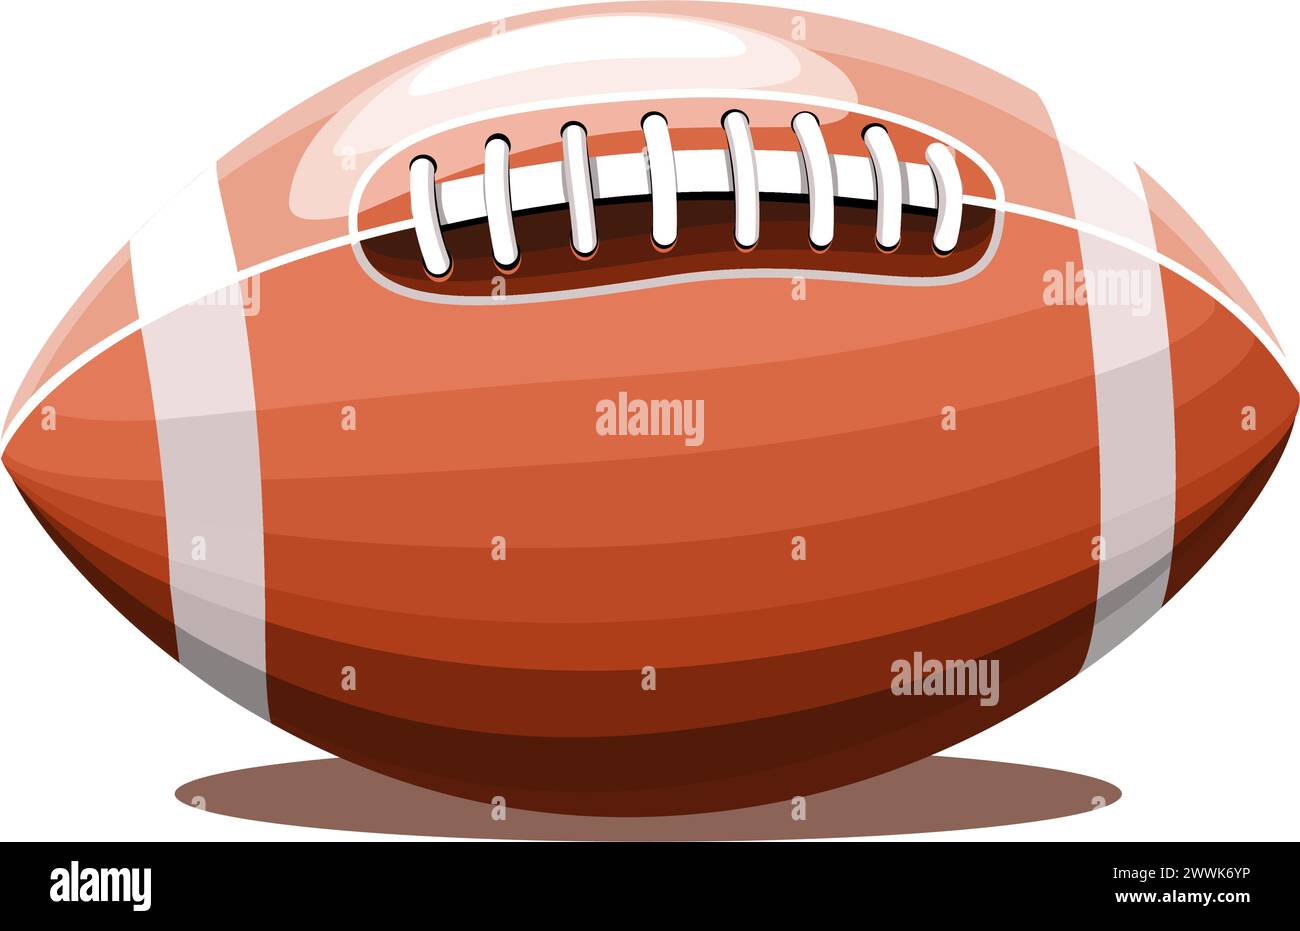 American football ball in realistic style vector illustration Stock Vector